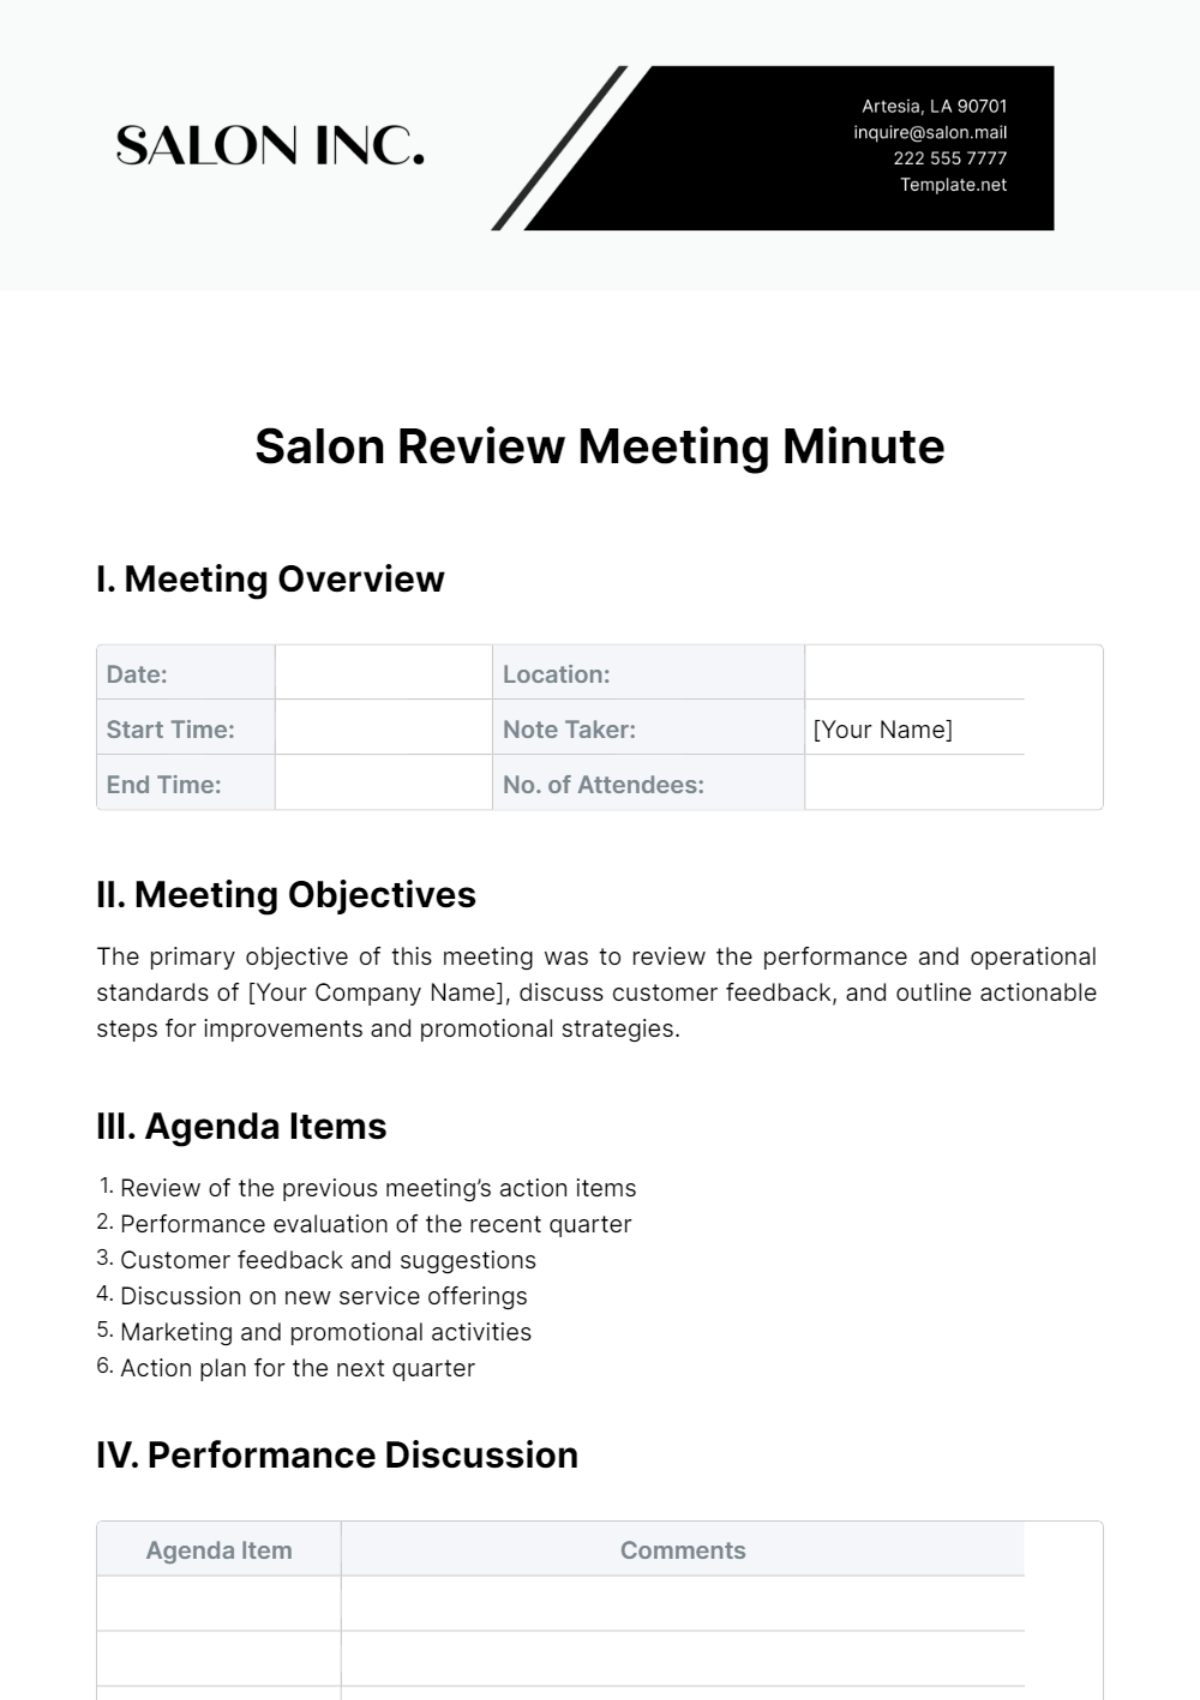 Free Salon Review Meeting Minute Template